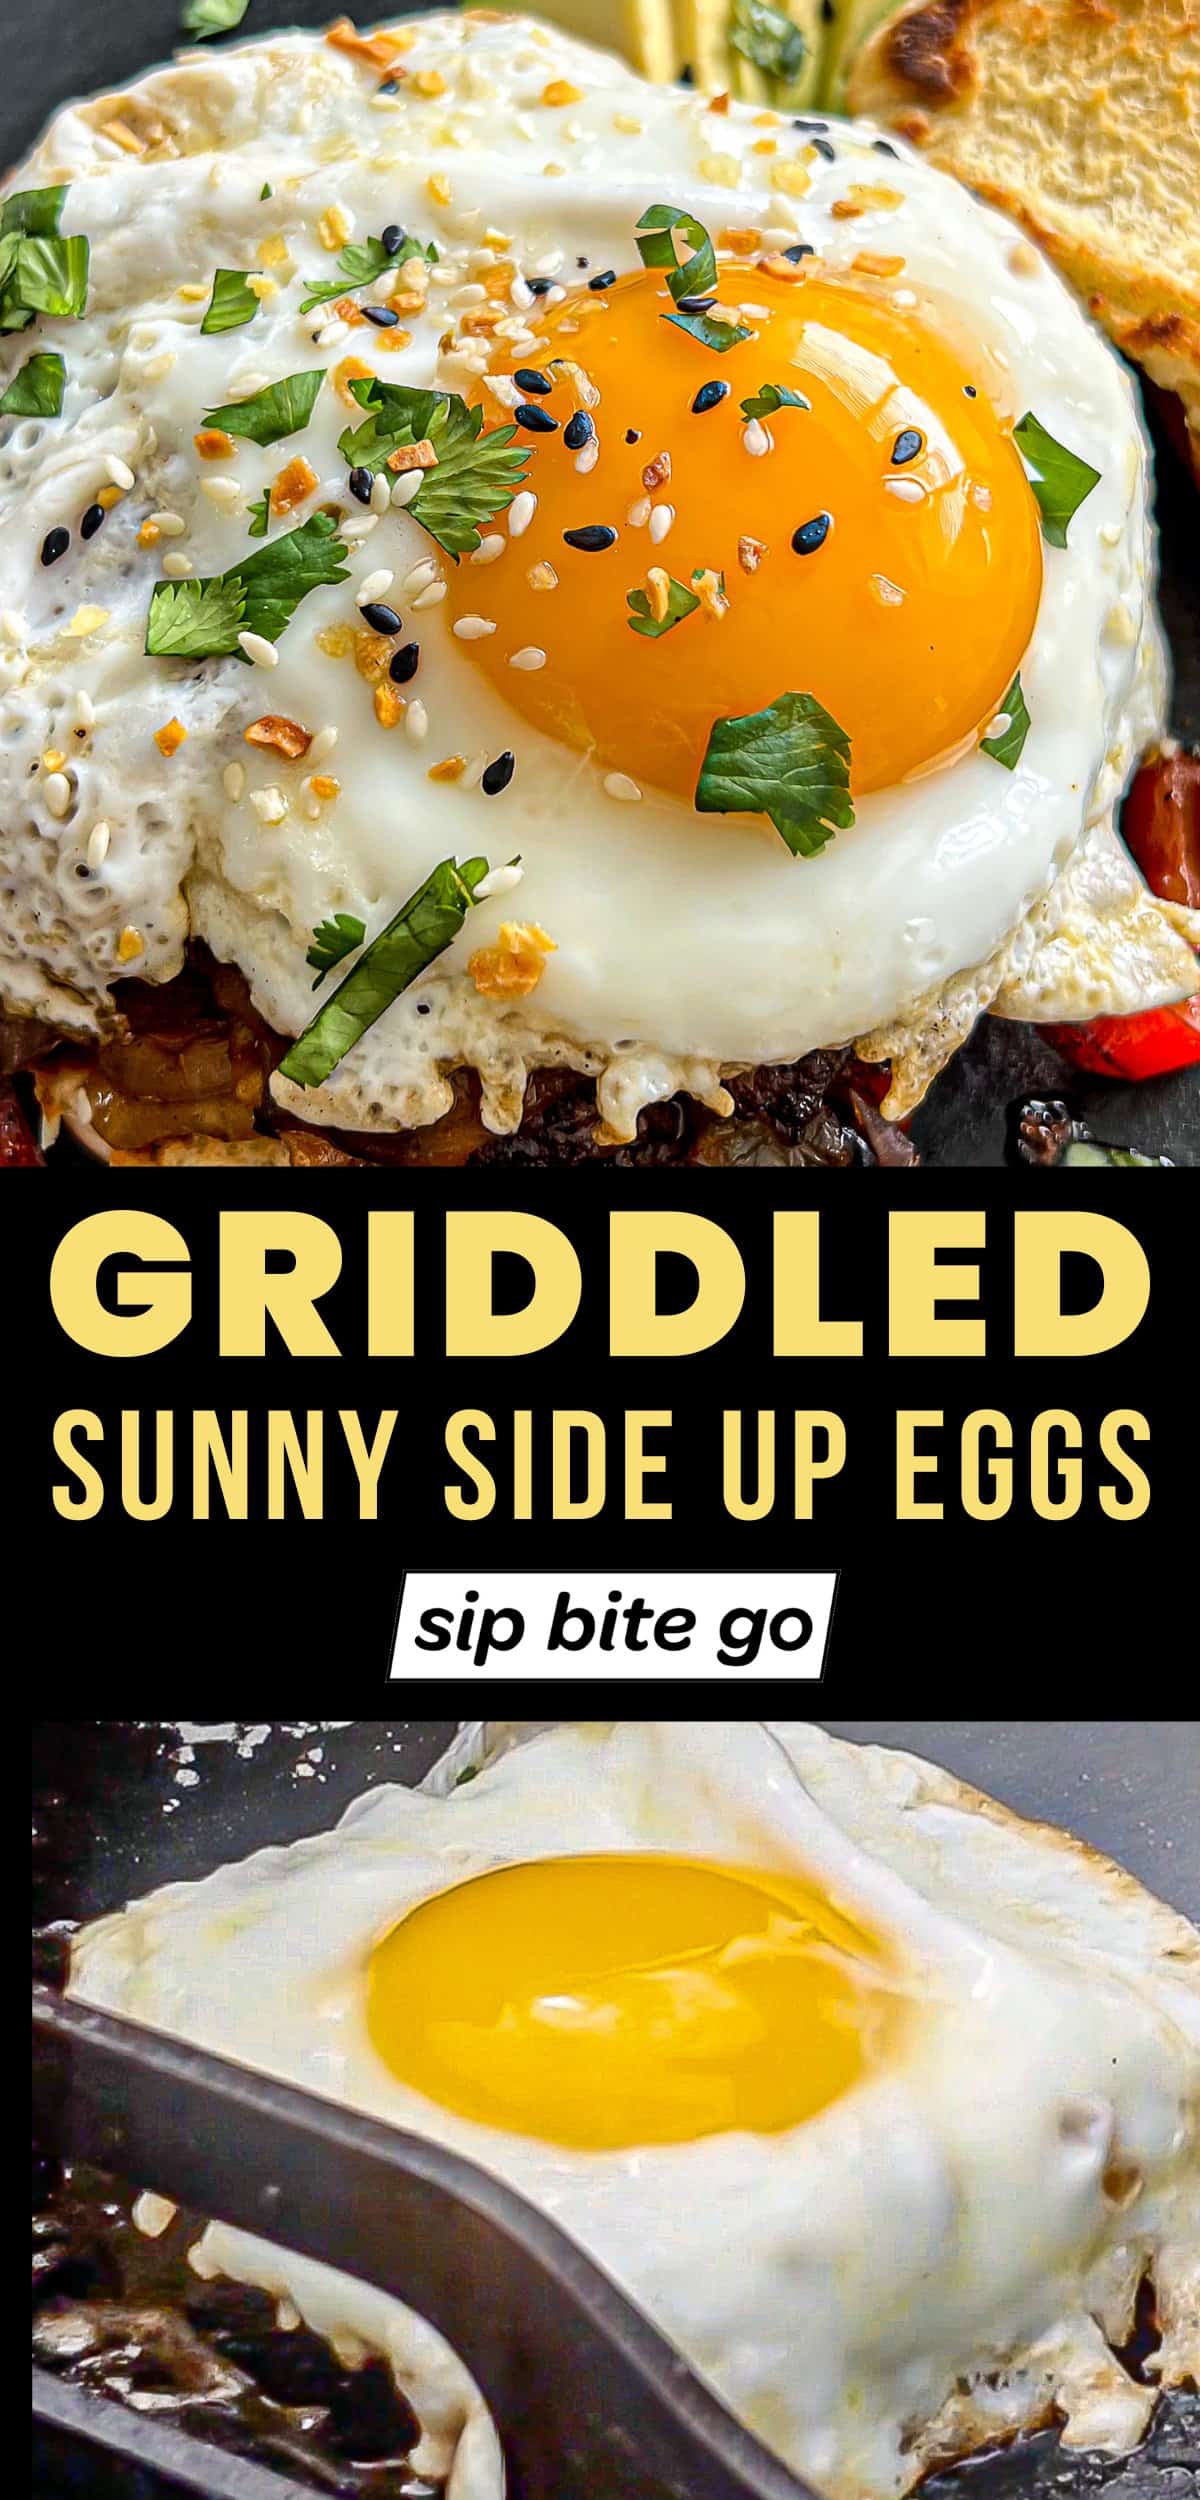 Griddle Cooking Sunny side up eggs on the Traeger Grills Flatrock Griddle with Sip Bite Go logo and text overlay